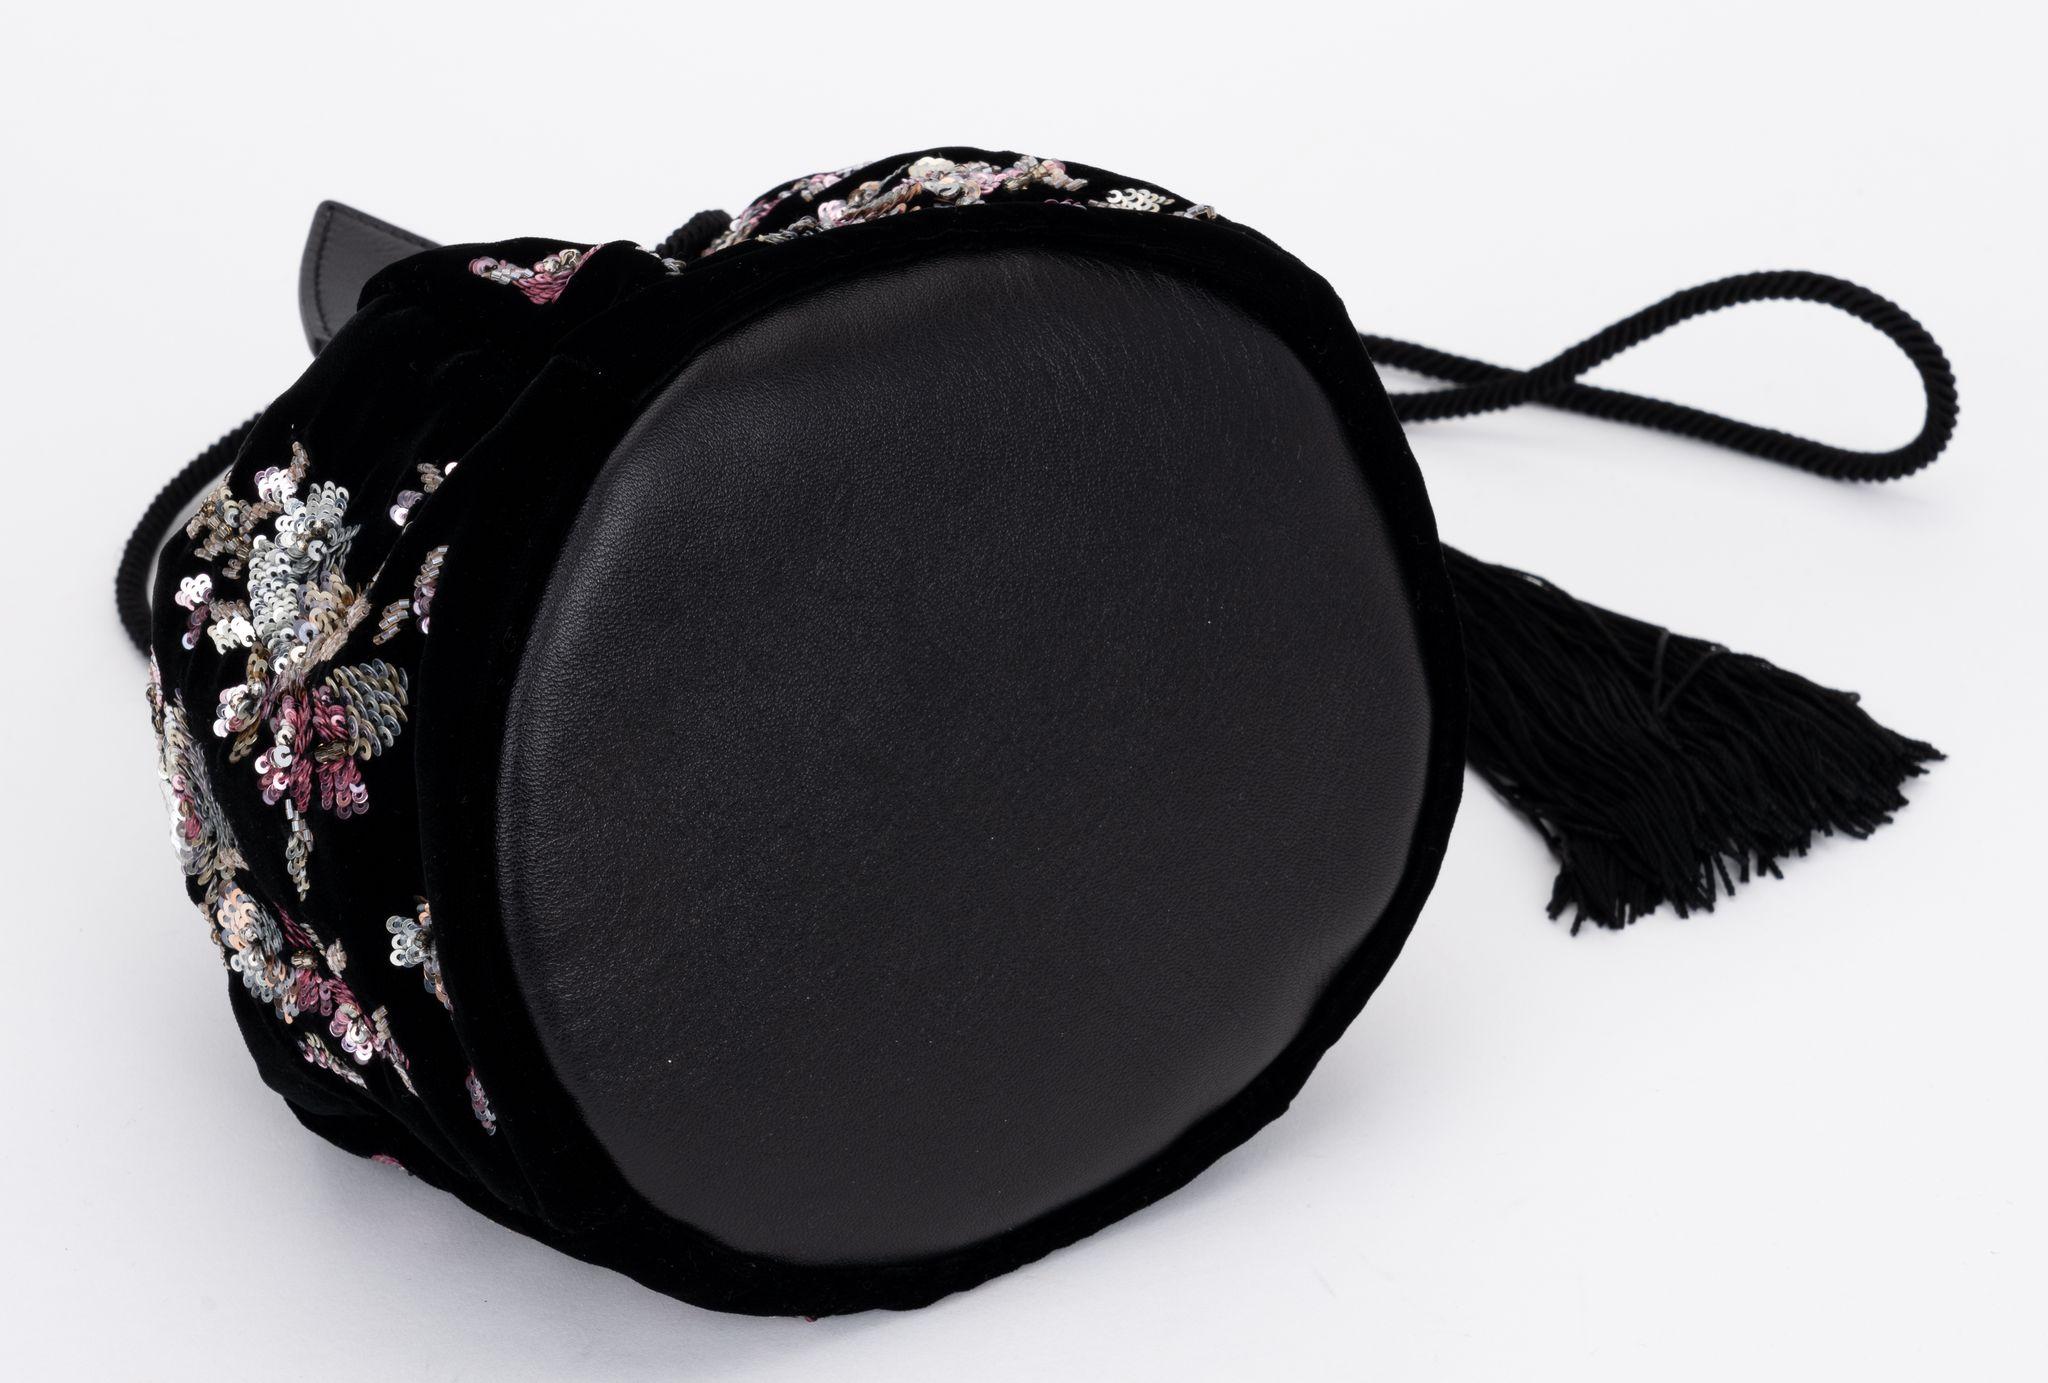 New Ysl Black Embroidered Bucket Bag In New Condition For Sale In West Hollywood, CA